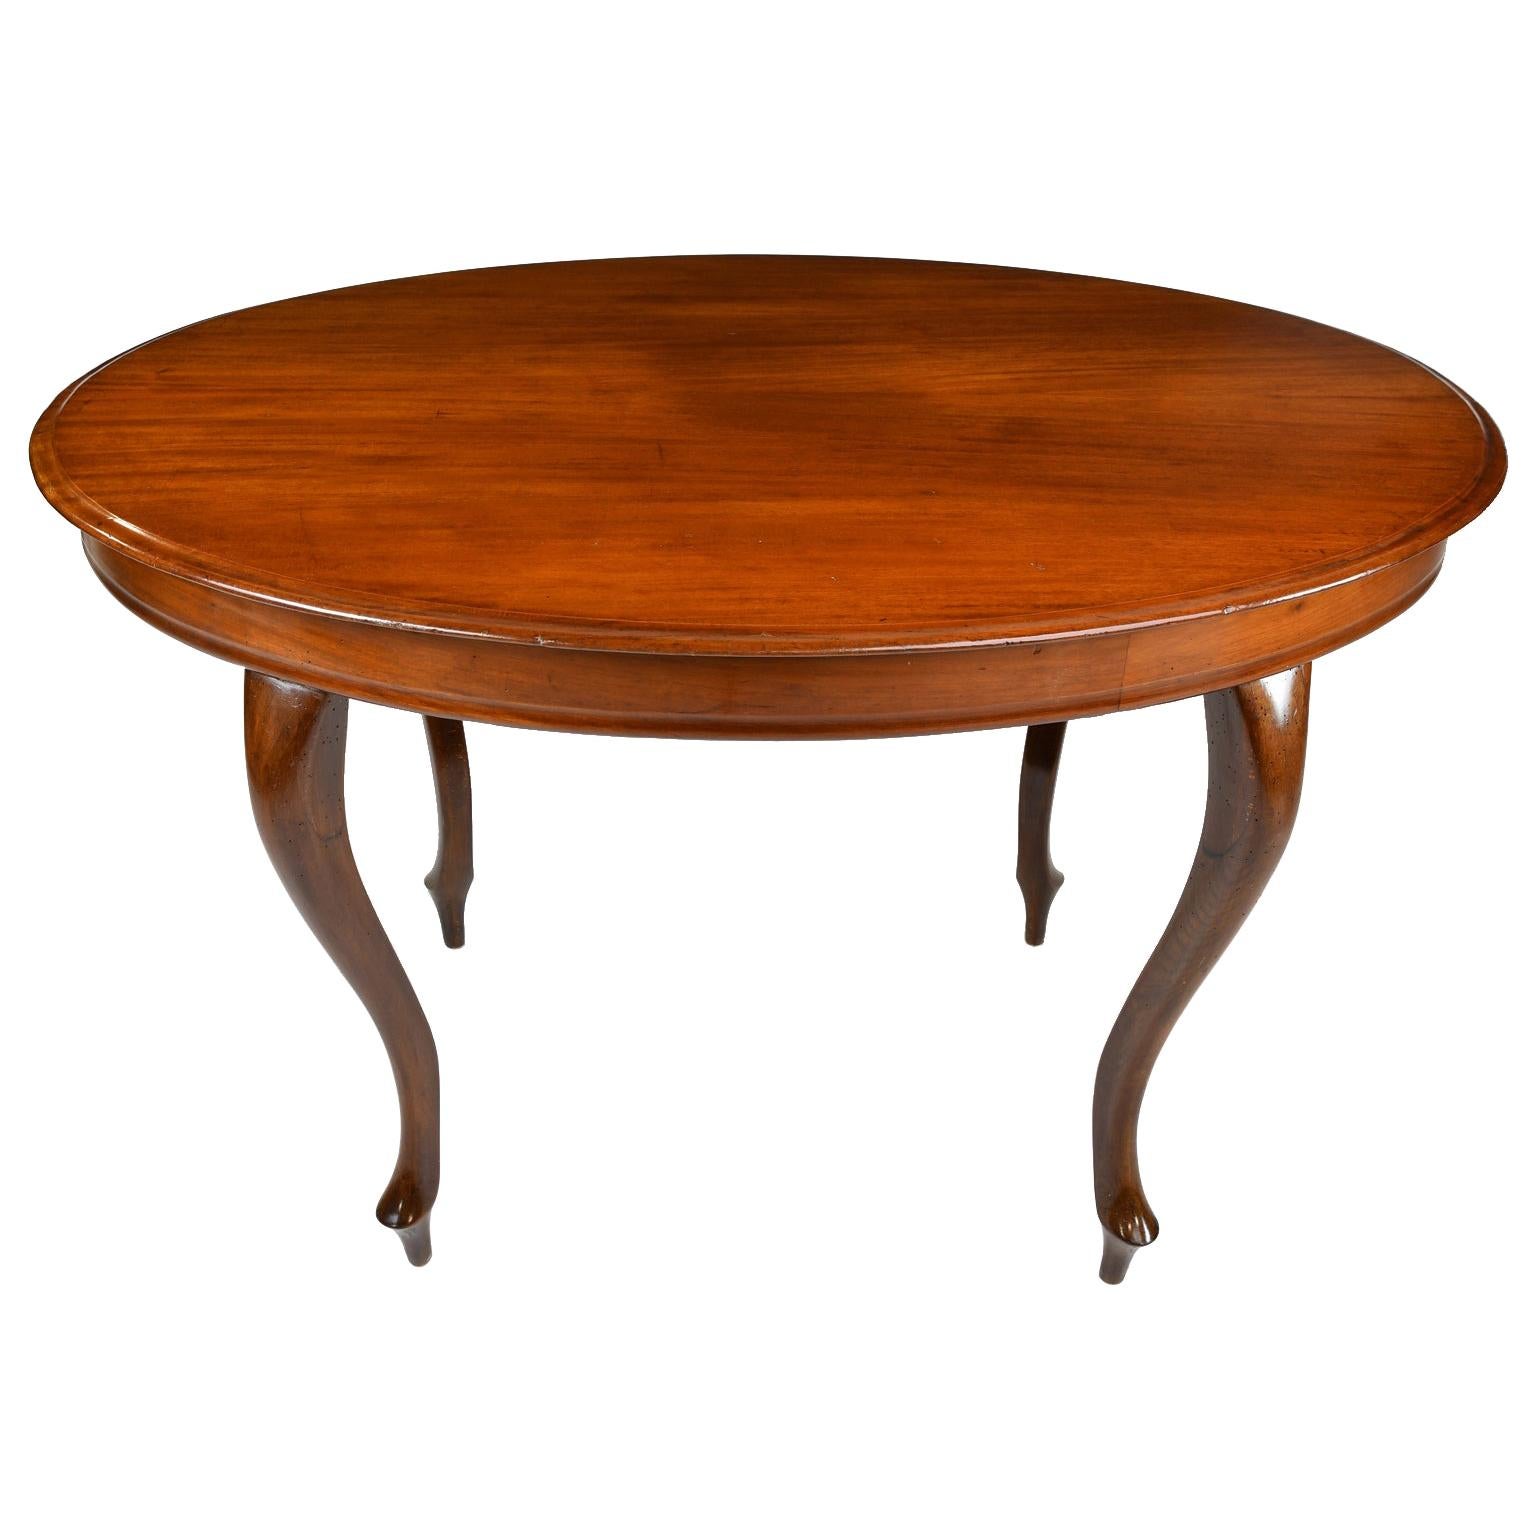 Antique Louis Philippe Style Mahogany Oval Dining/ Center Table, Denmark, c 1860